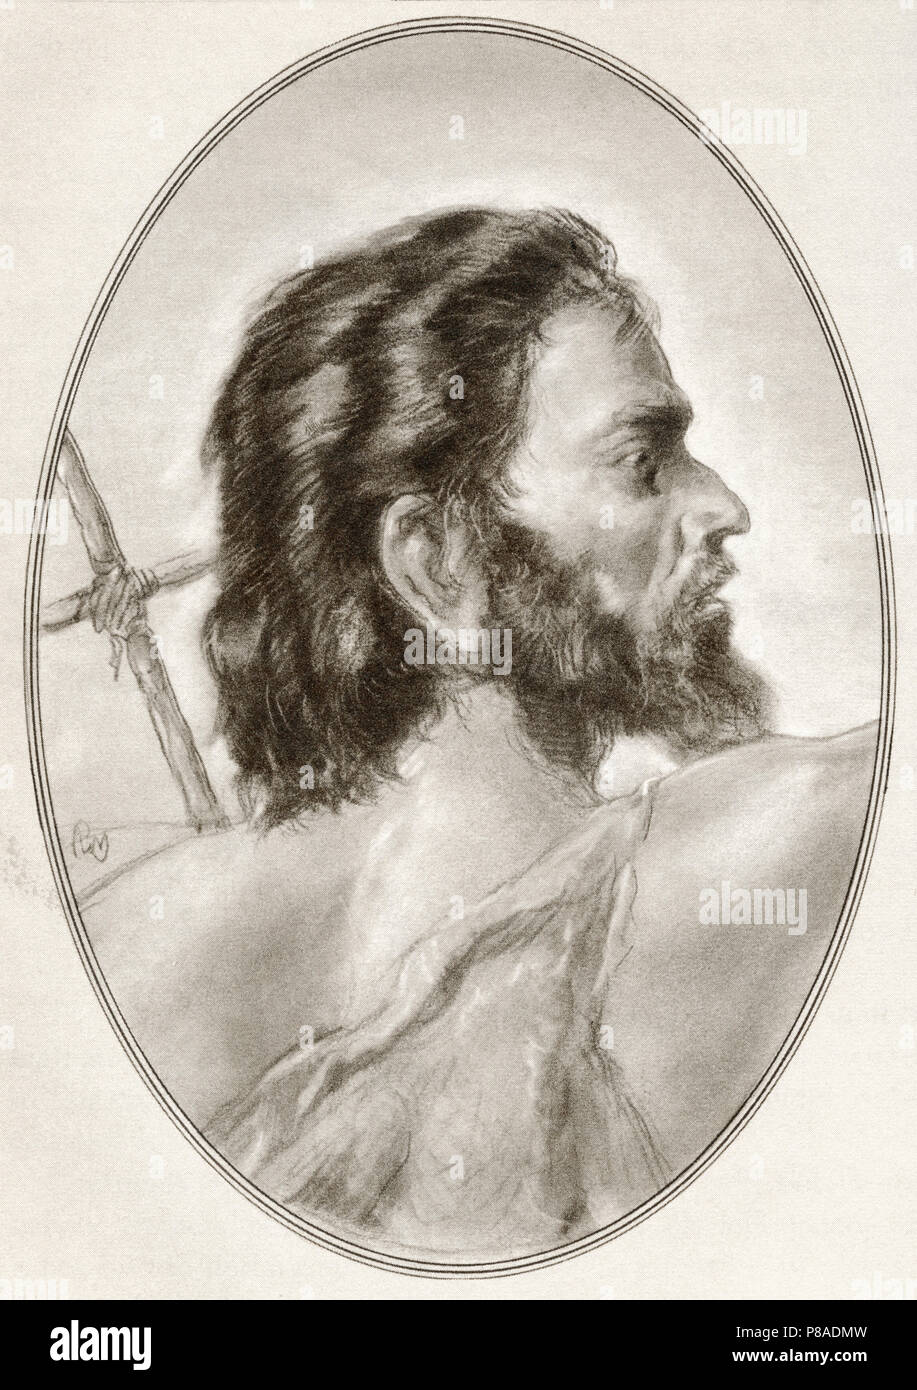 John the Baptist.  Jewish itinerant preacher.  Illustration by Gordon Ross, American artist and illustrator (1873-1946), from Living Biographies of Religious Leaders. Stock Photo